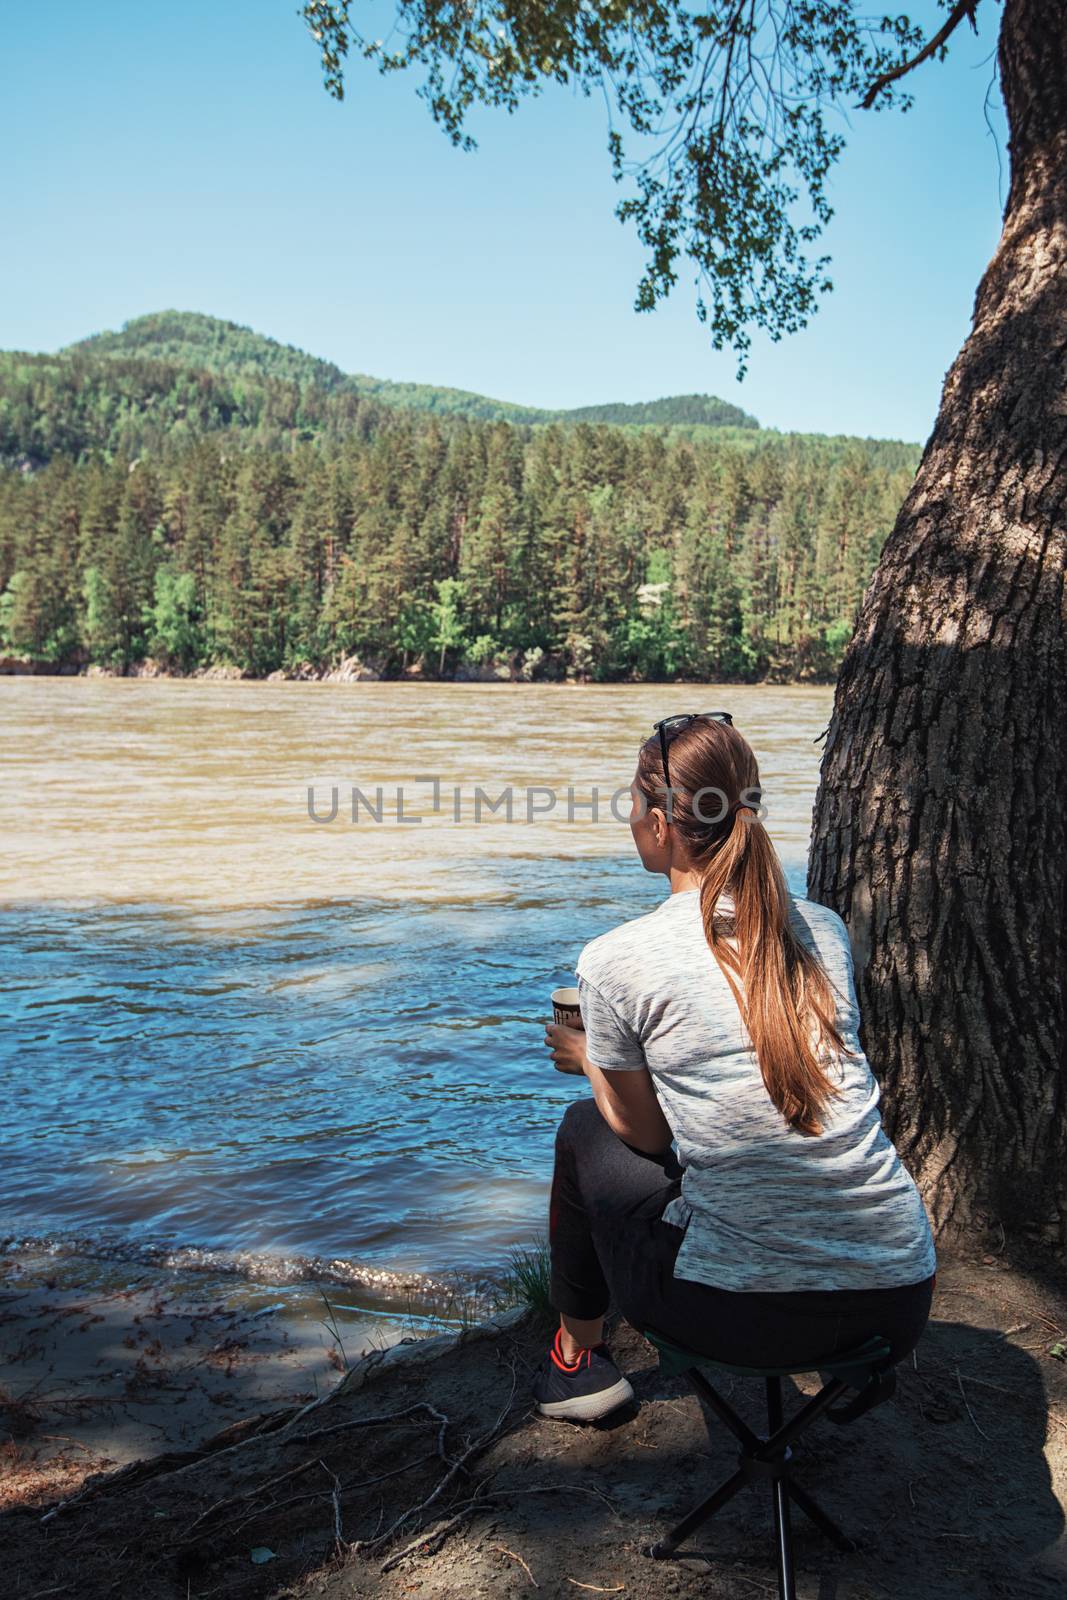 Woman having rest on river coast at the Altai mountain